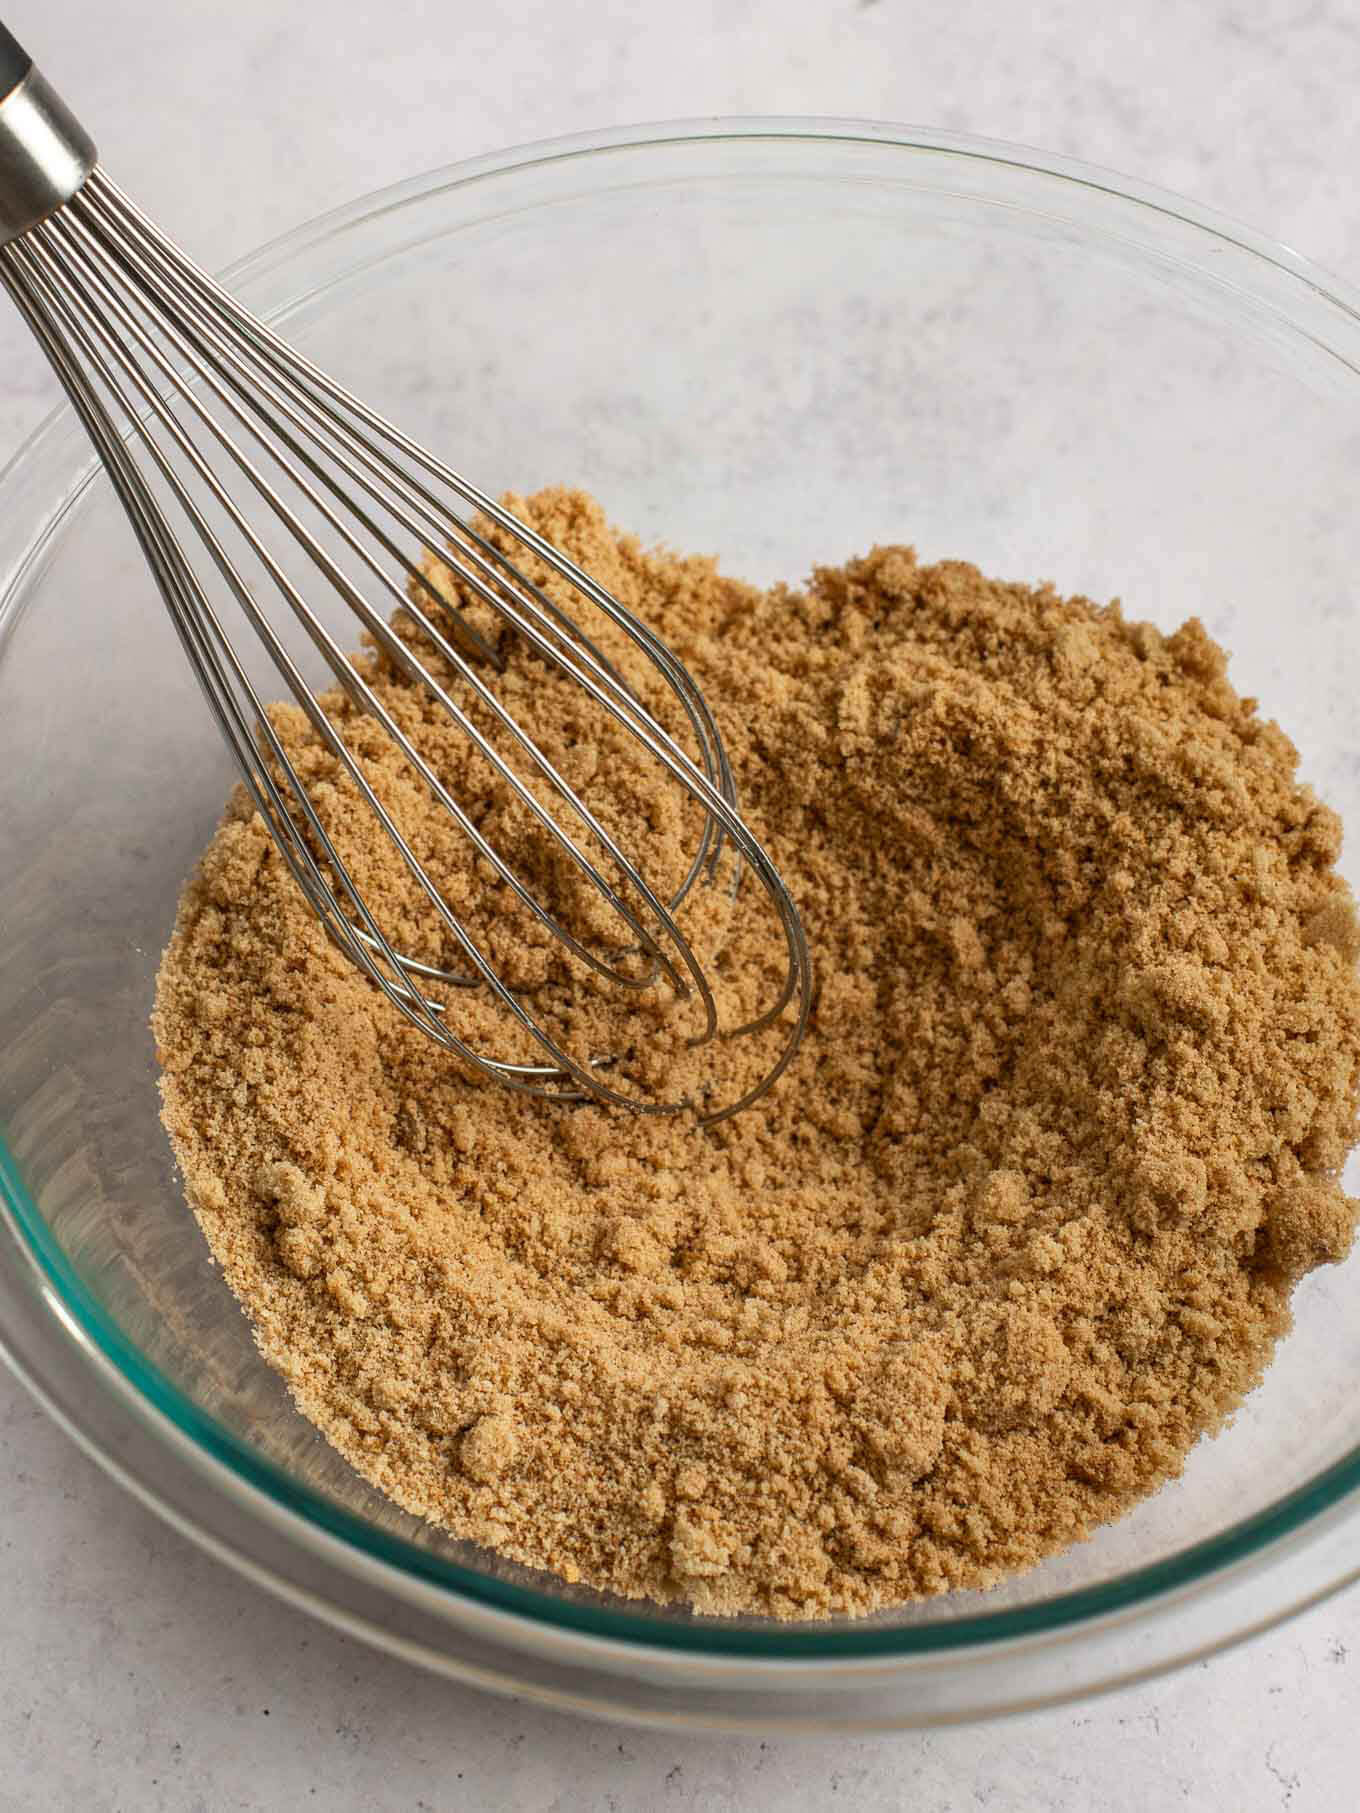 Brown sugar, flour, and spices whisked together in a mixing bowl.